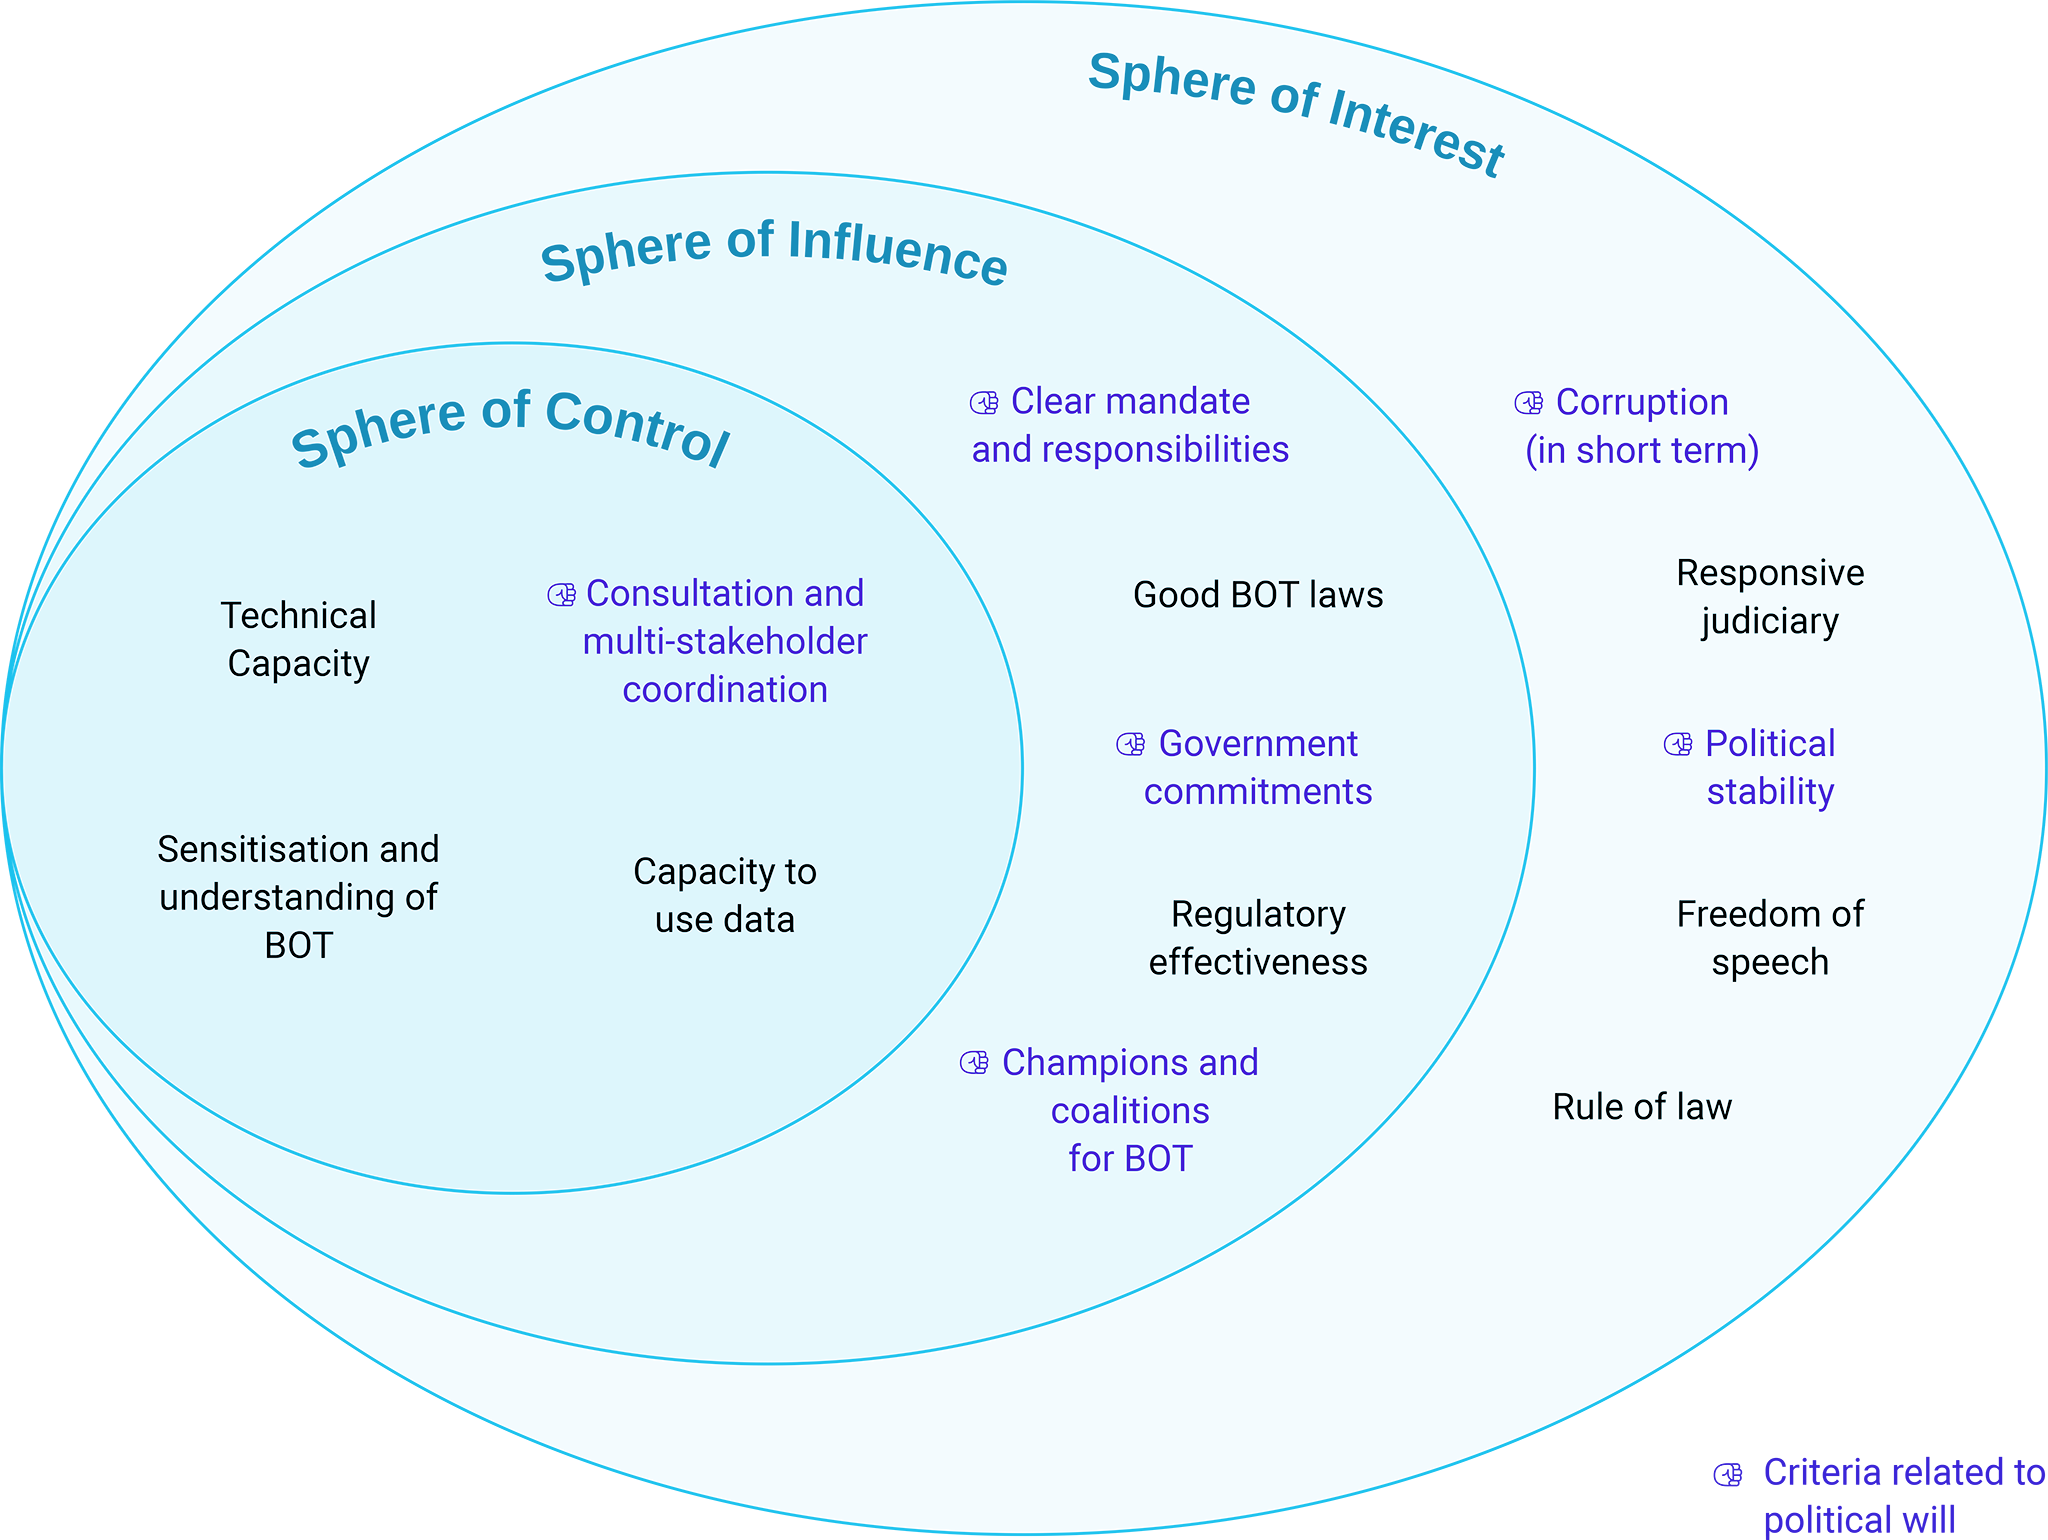 The spheres of control, influence, and interest of the proposed programme